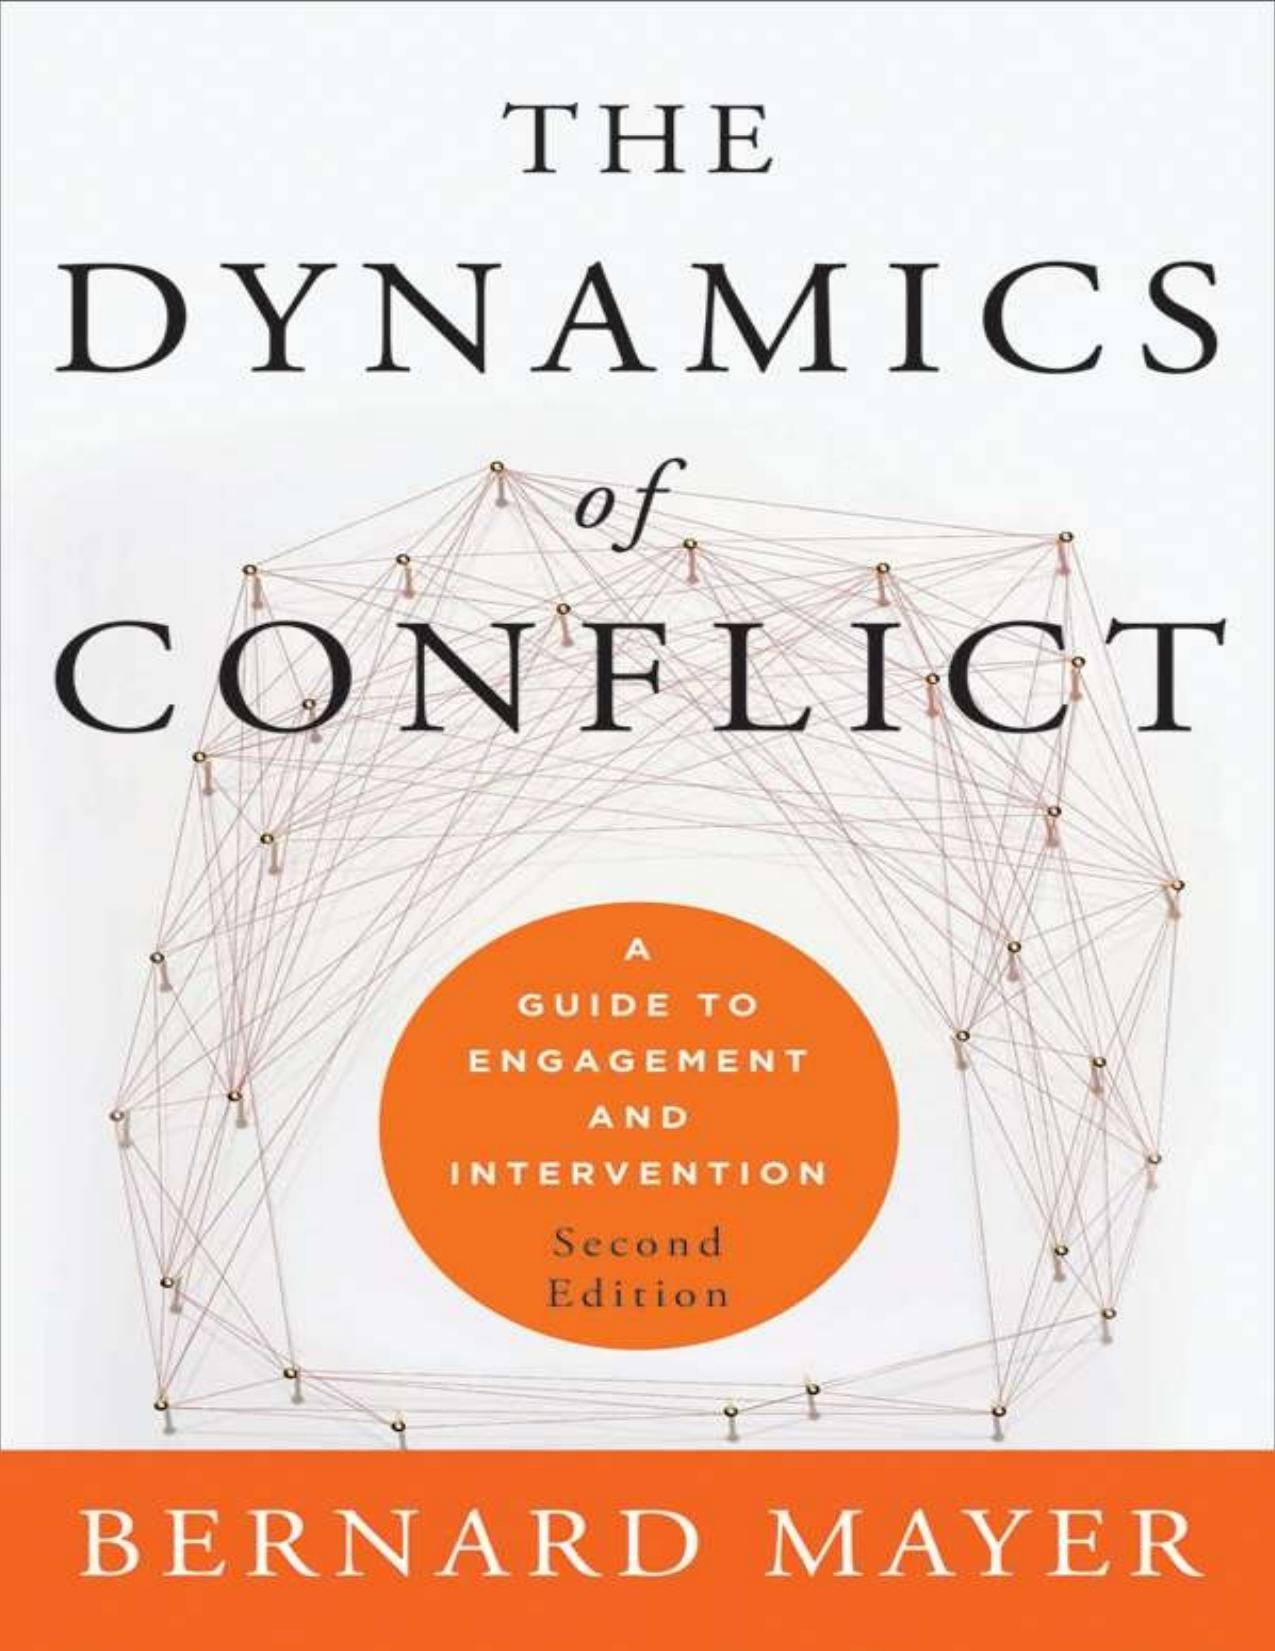 The Dynamics of Conflict: A Guide to Engagement and Intervention - PDFDrive.com